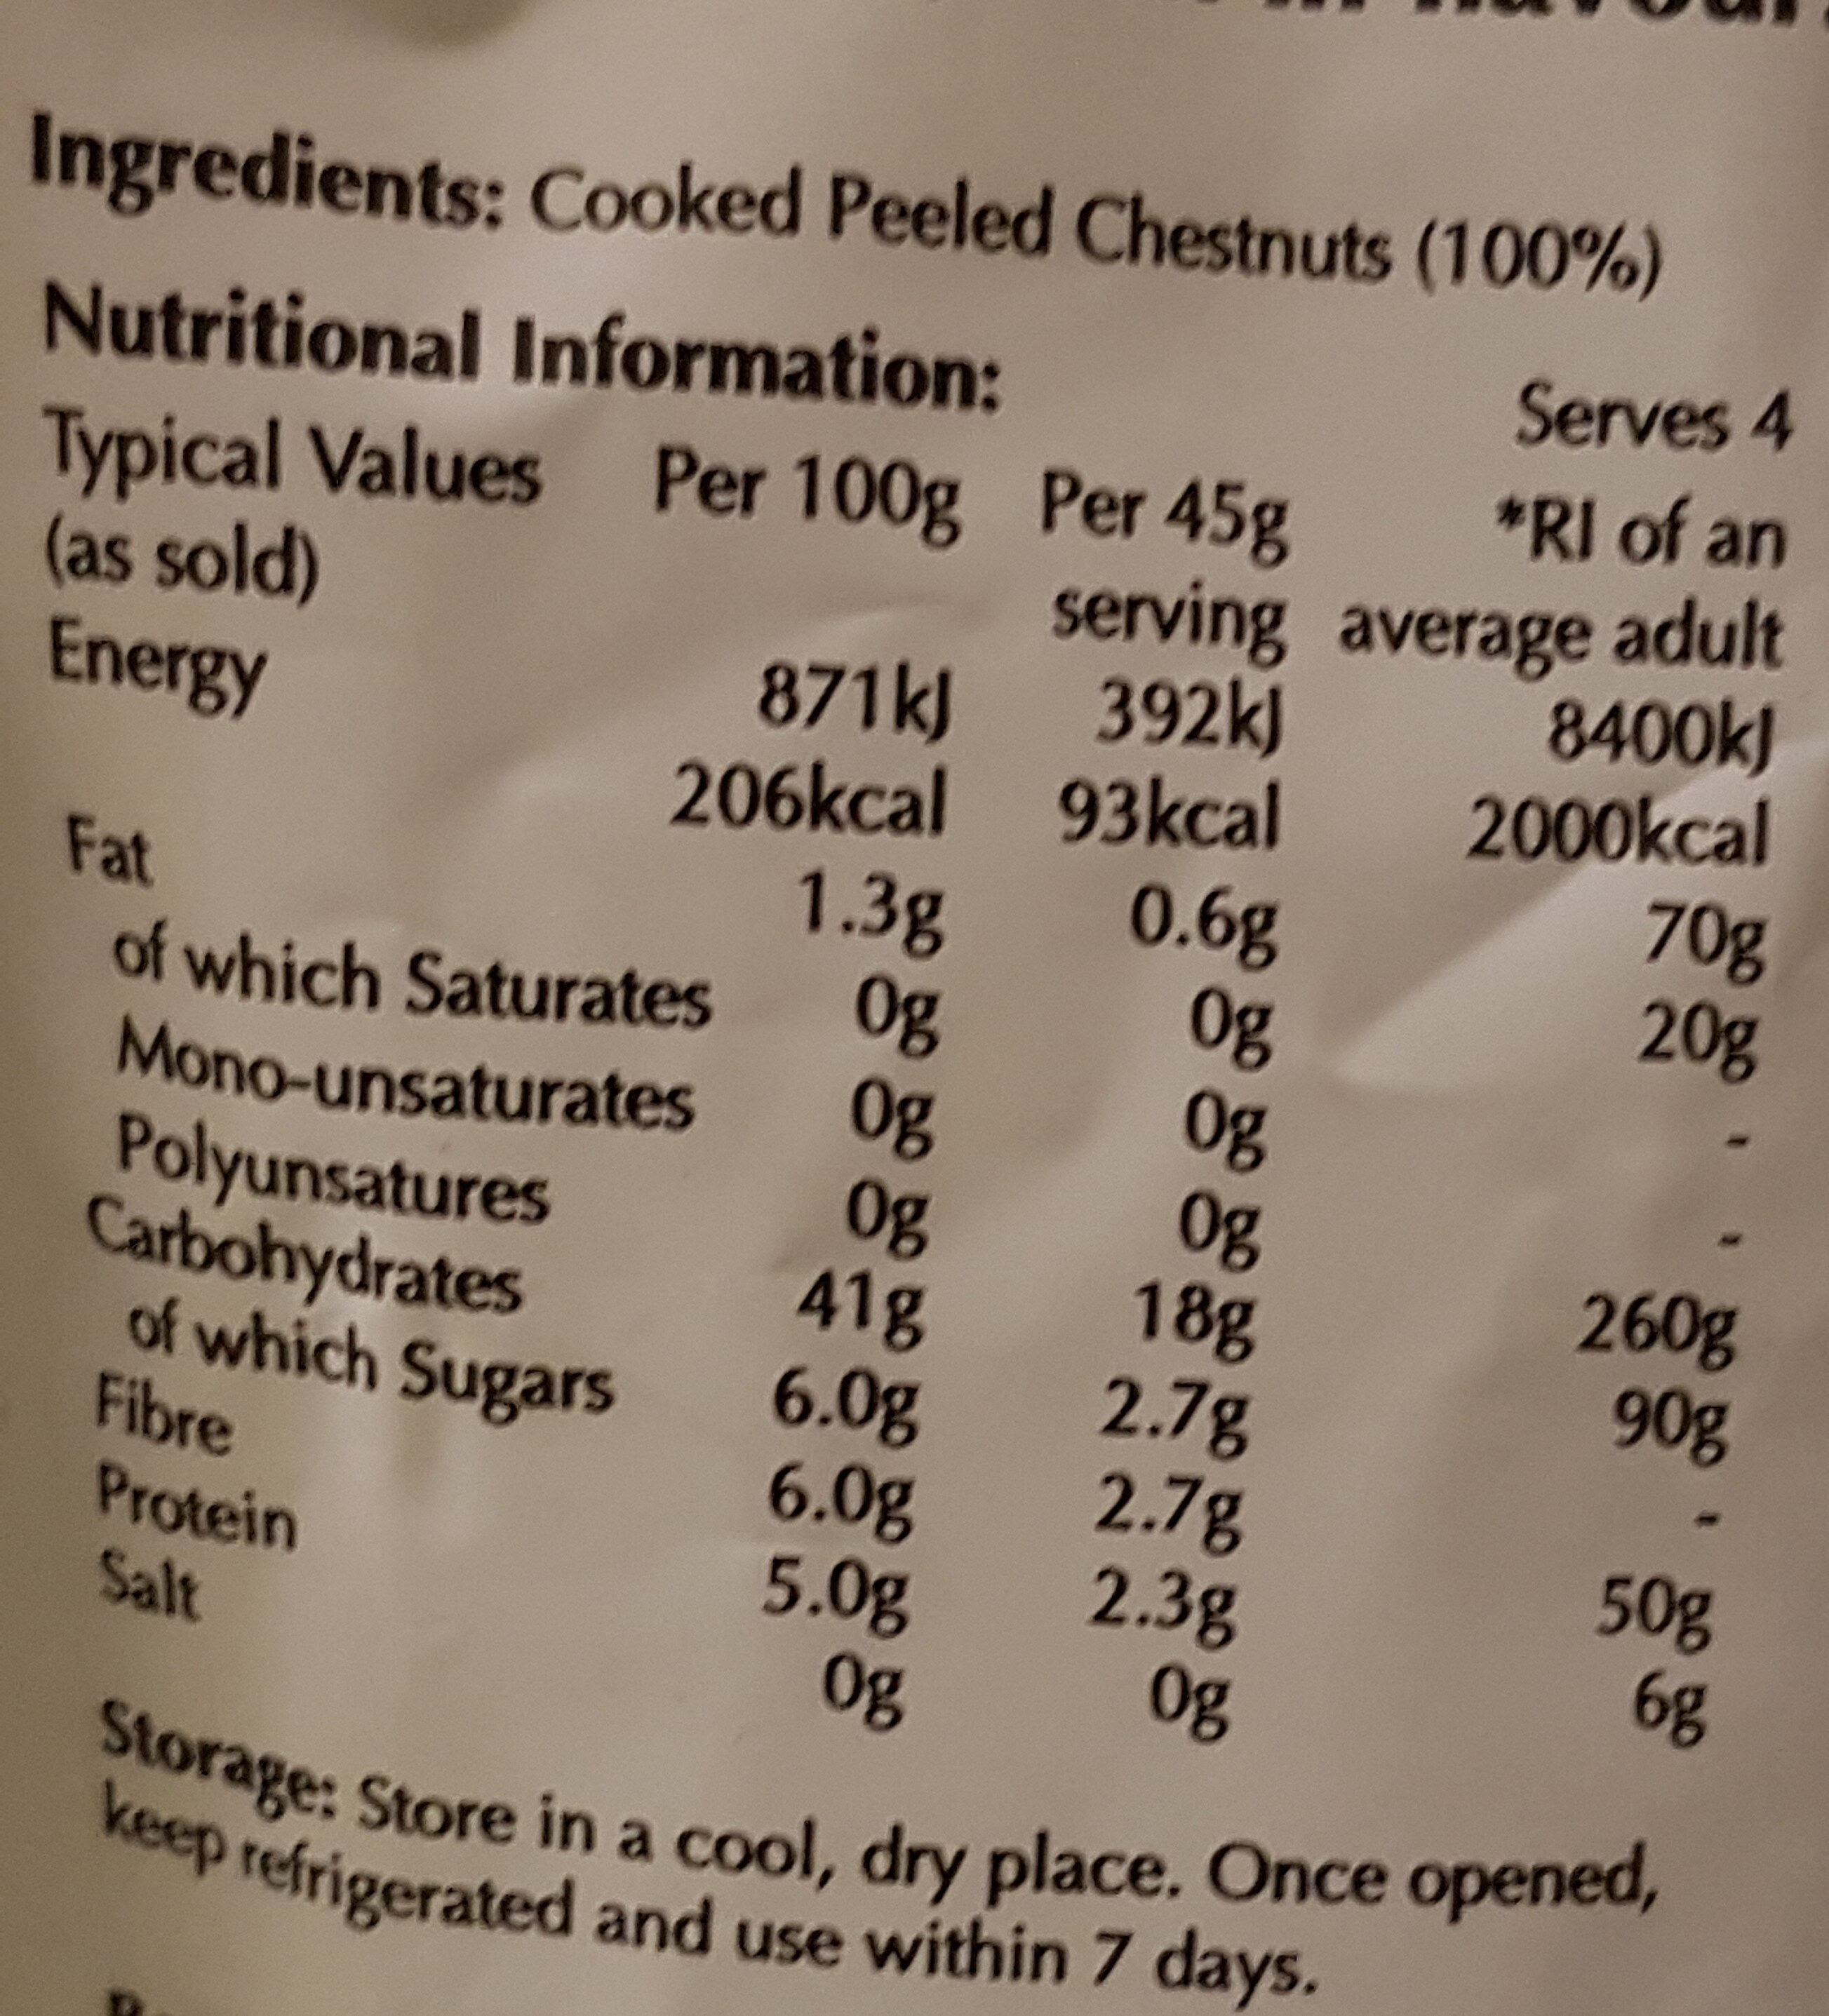 Whole Chesnuts - Ingredients